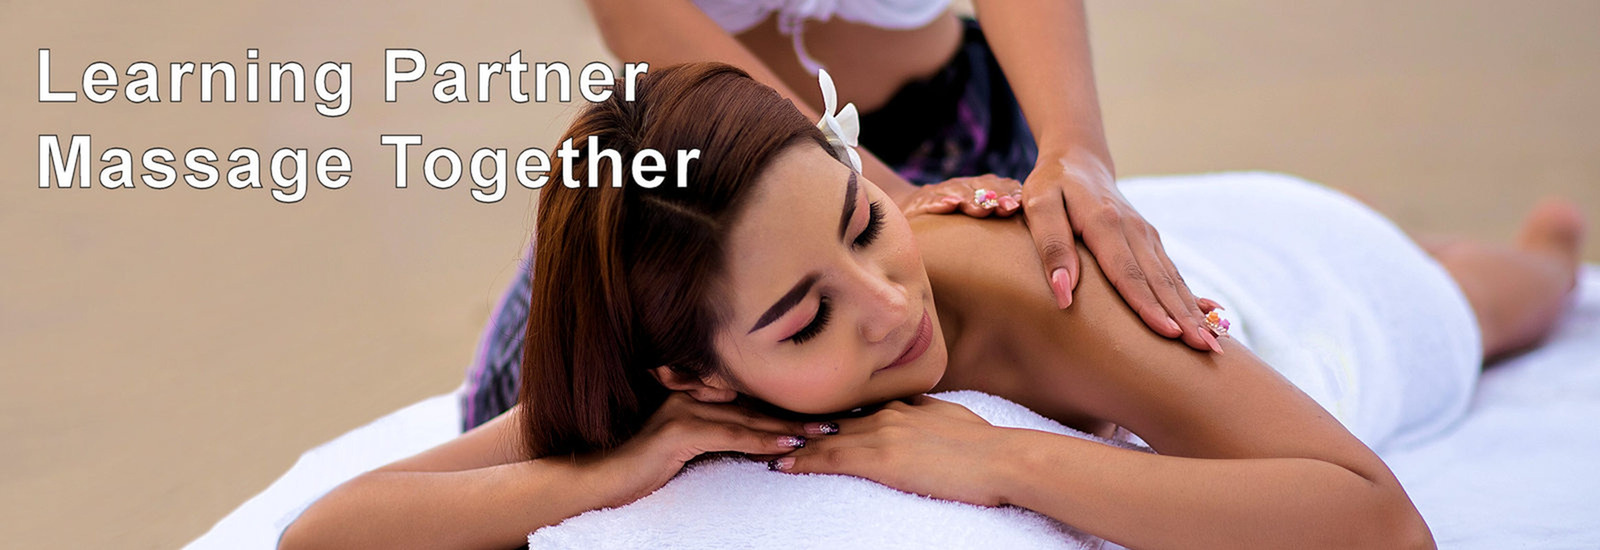 Learn Partner Massage Together at Enlightening Couples Retreat in Florida